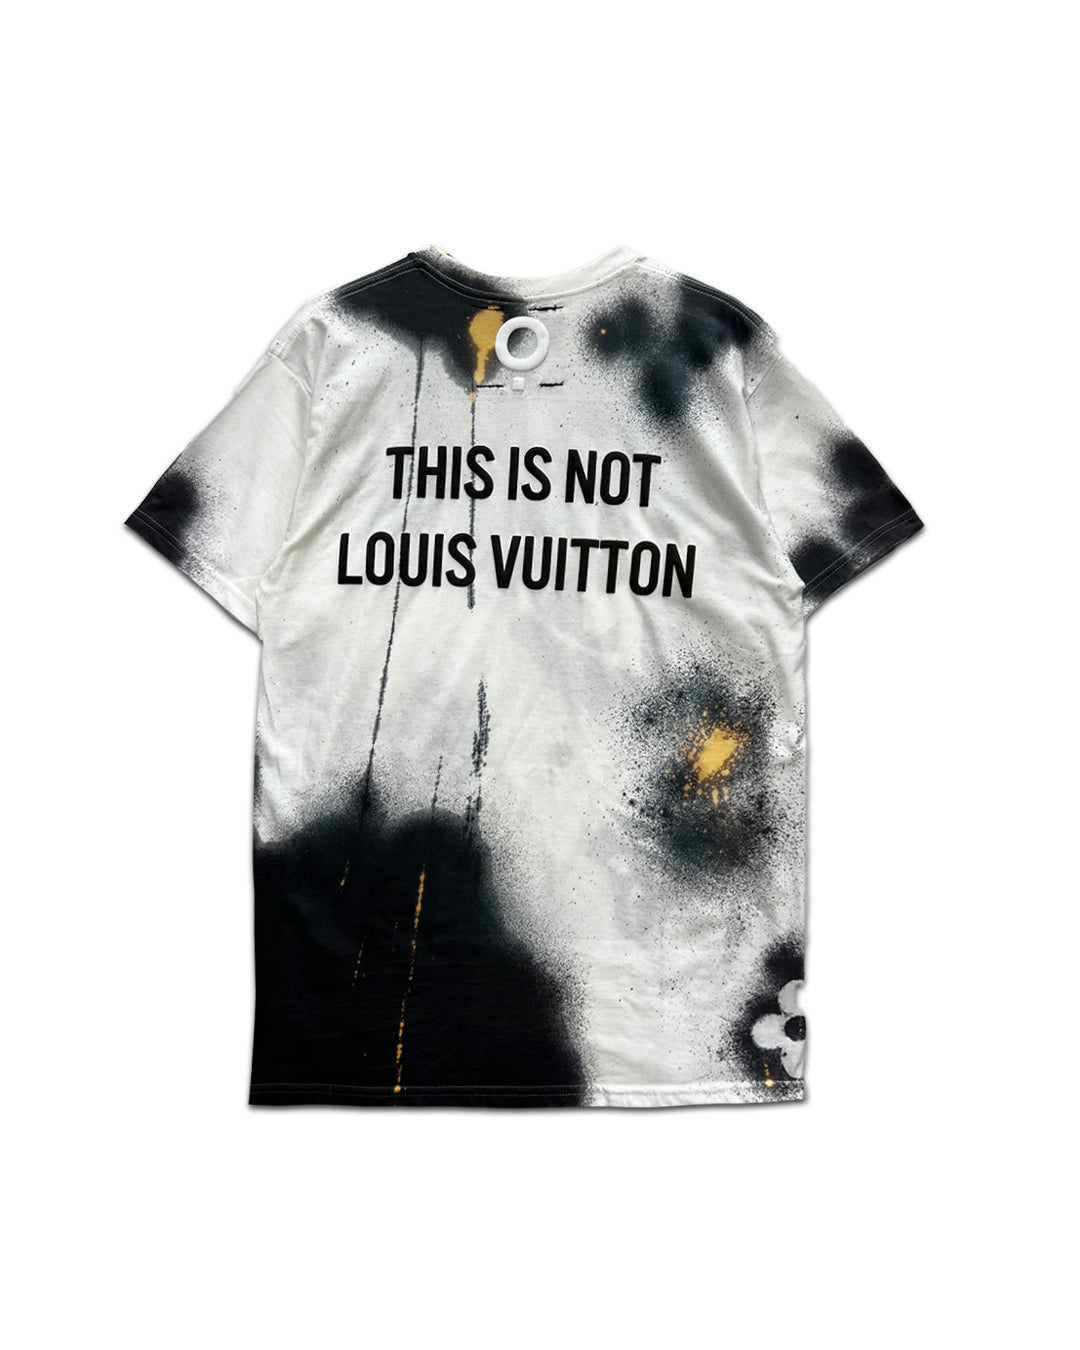 This Is Not LV Black Dust Tee – DUST OF GODS